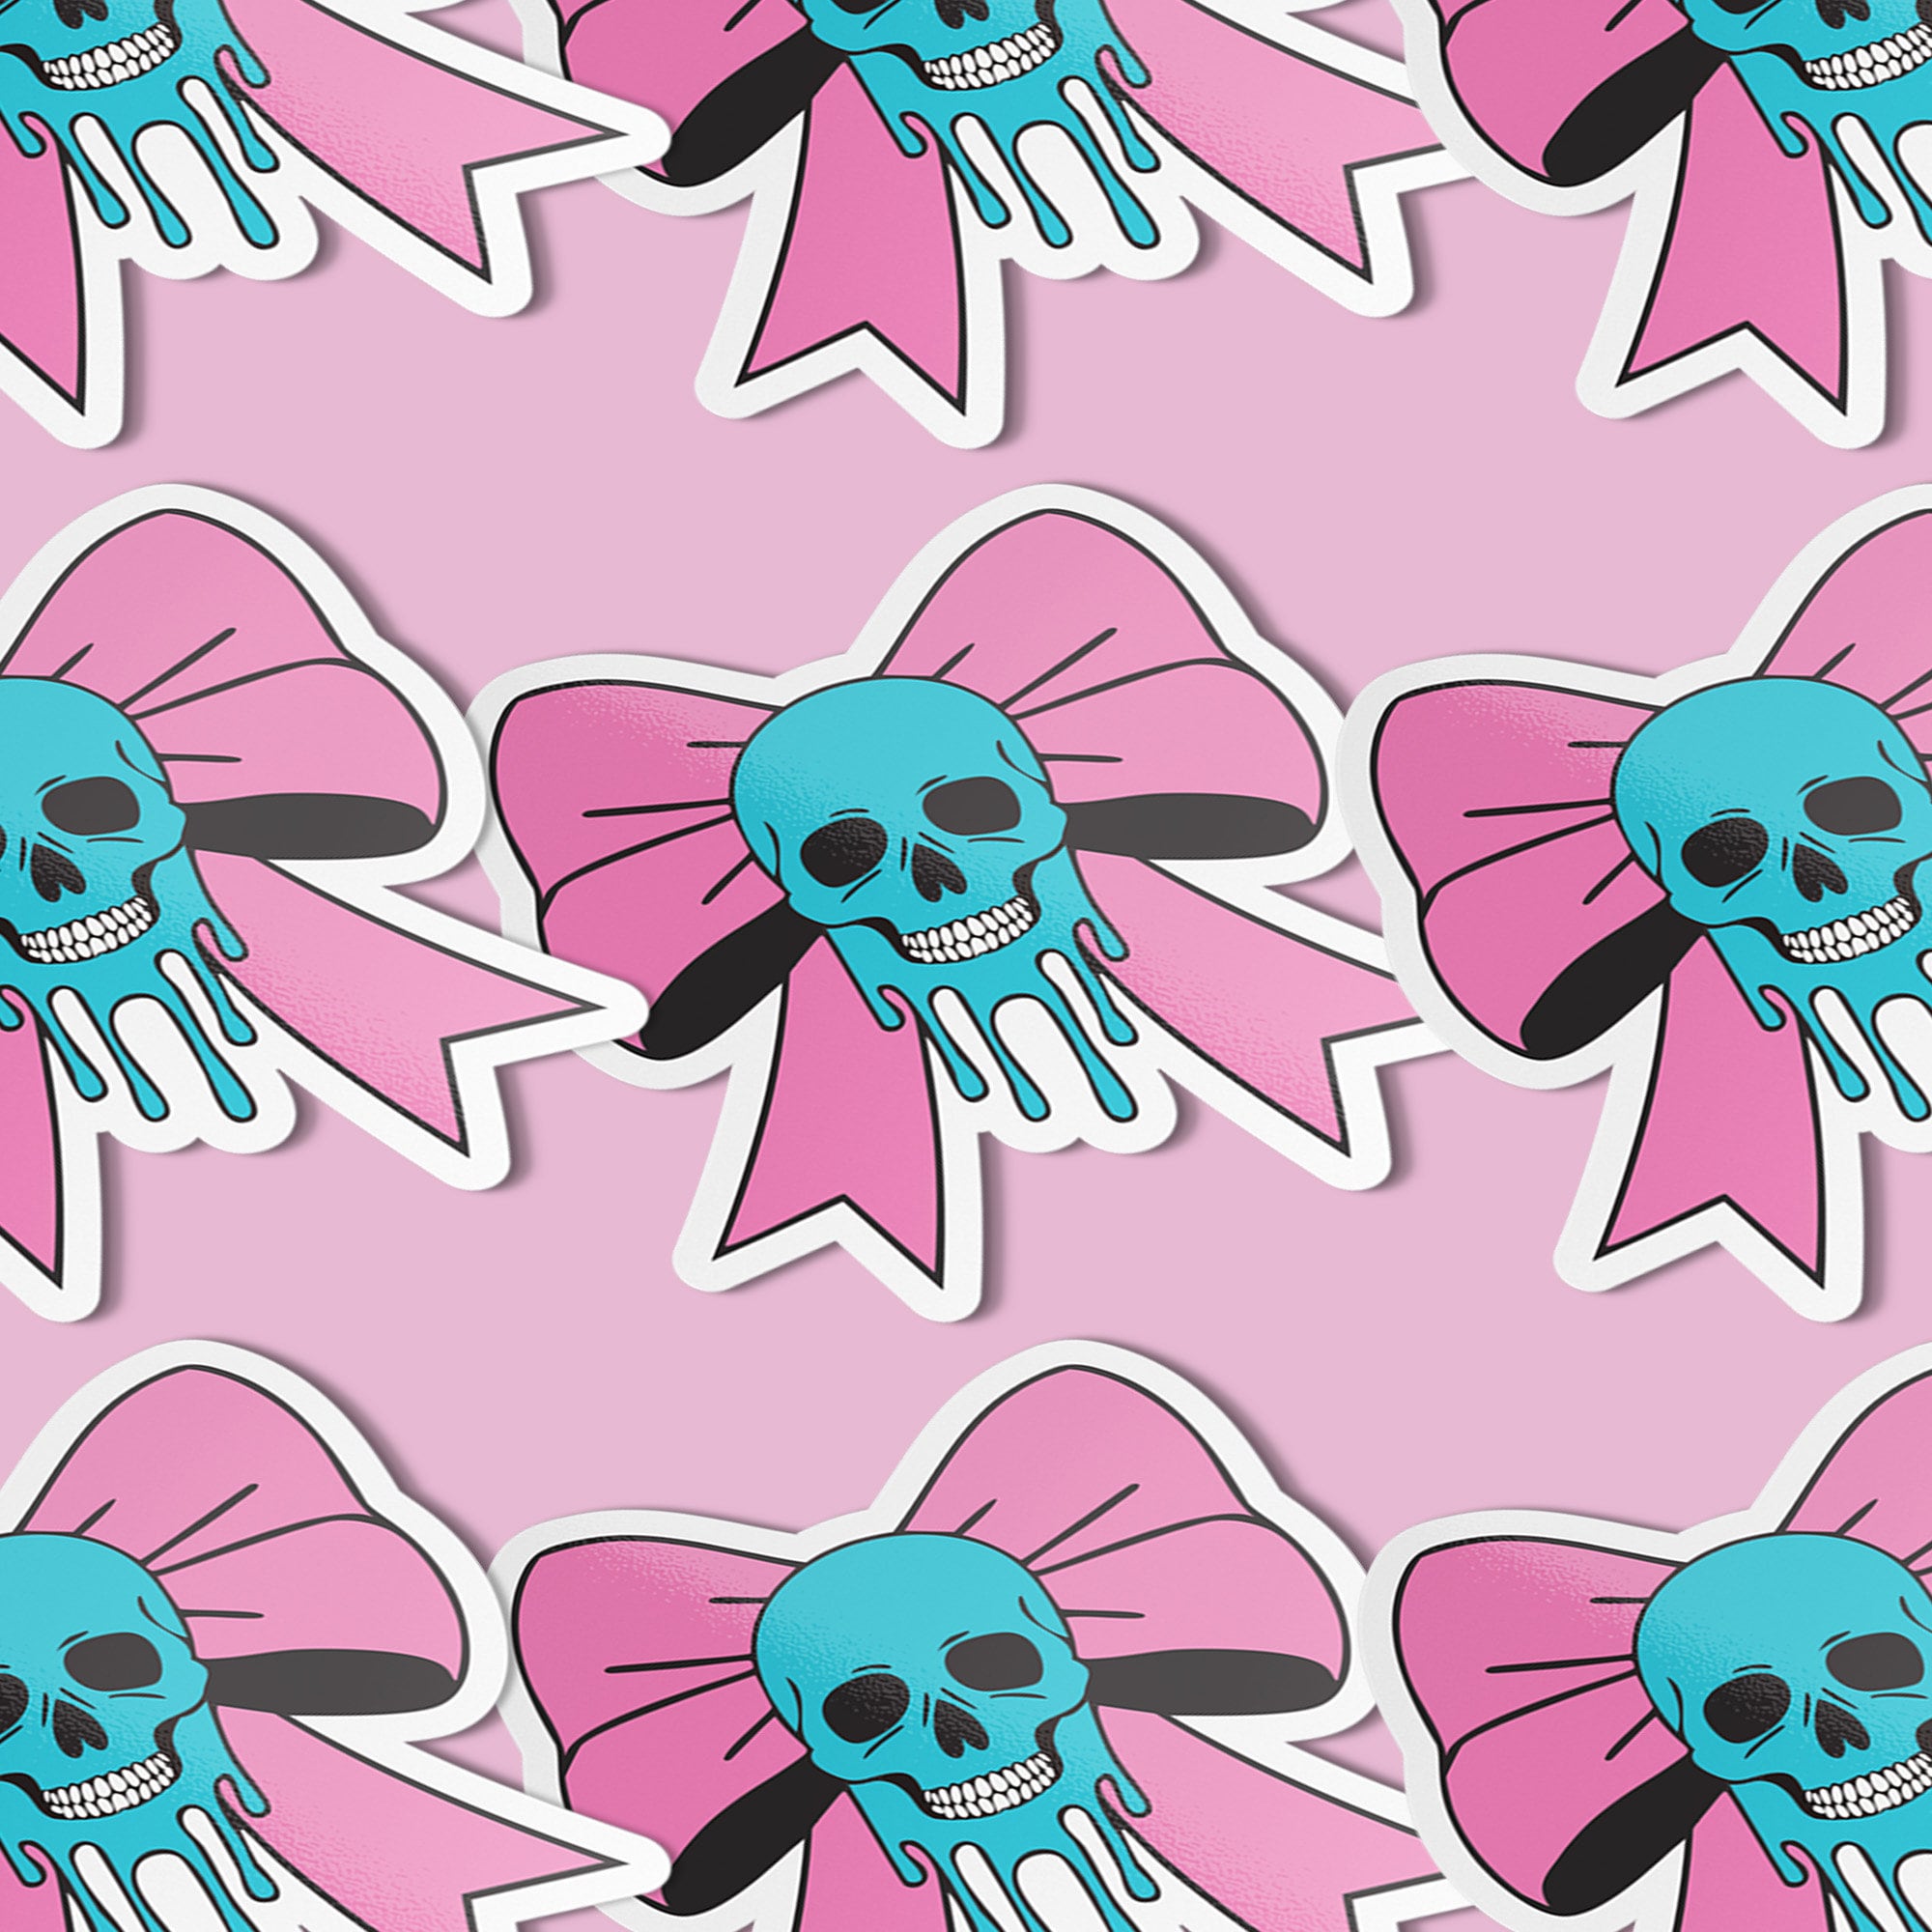 Pastel goth skull bow sticker with a blue skull and pink bow, perfect for creepy cute and punk lovers. Available in Prism, Gem, and Glitter finishes. Handmade in Austin, Texas.